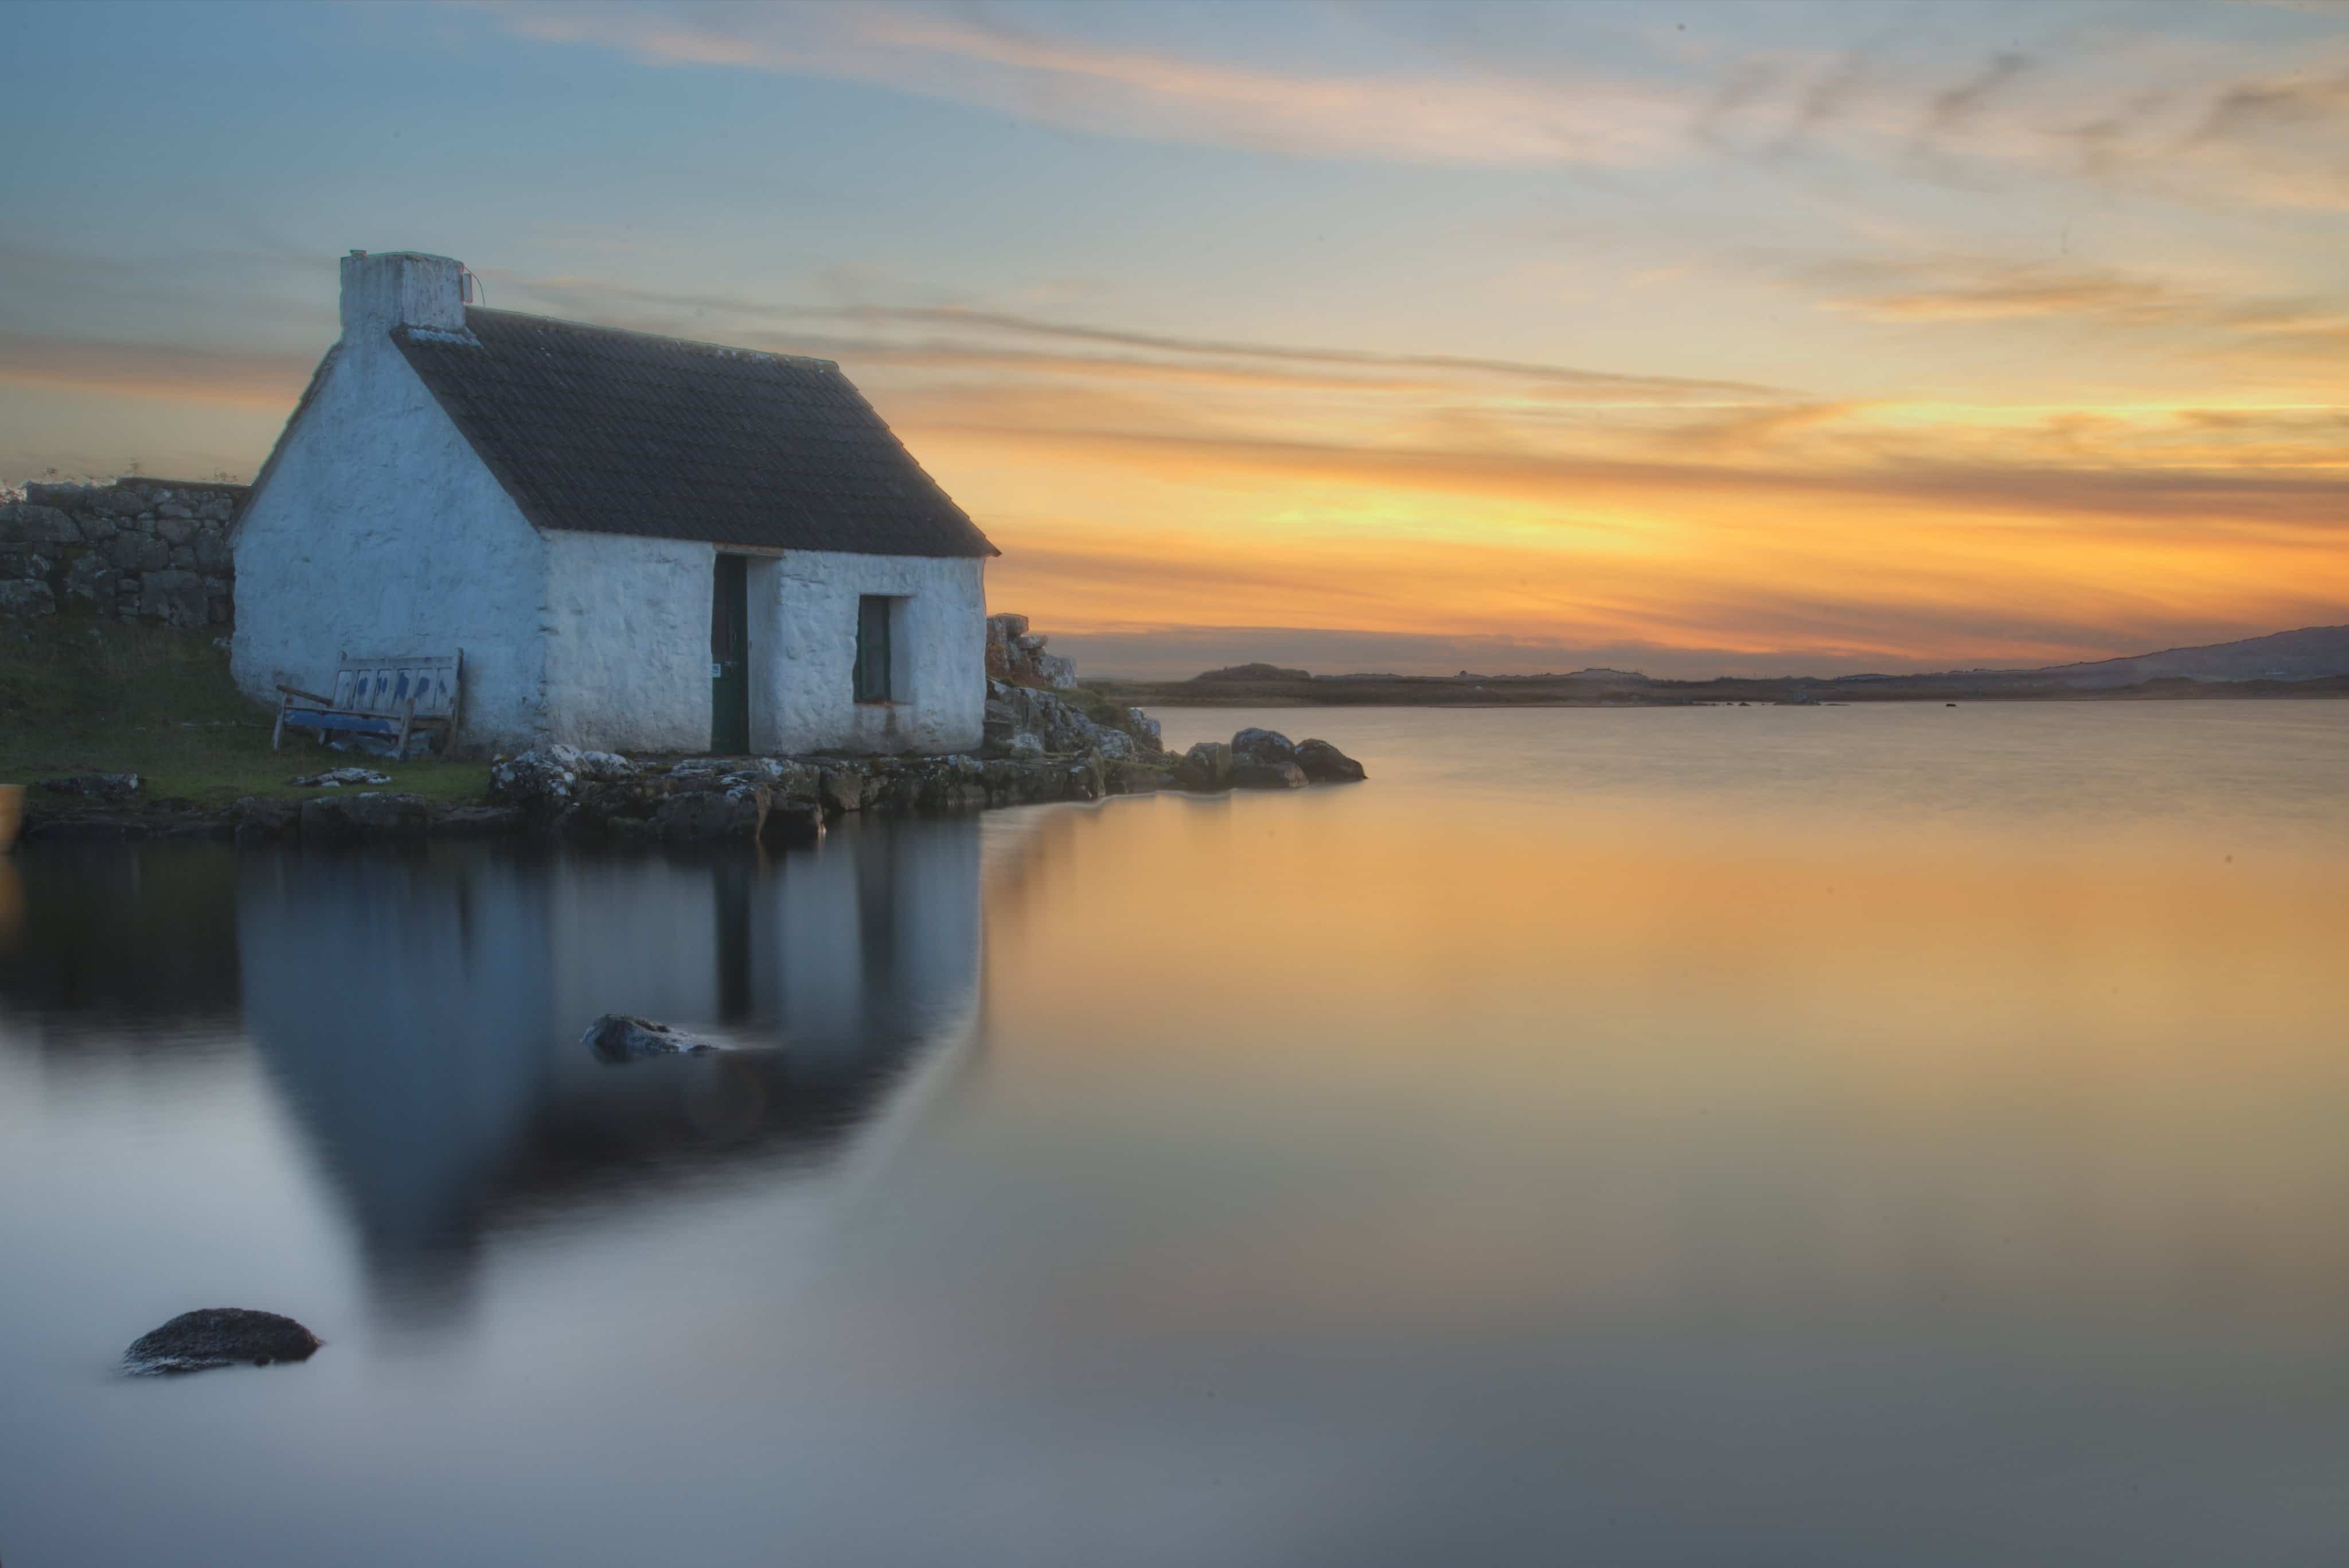 Sunset on the lake in Screebe, Galway by WoodRoad Photography @woodroadphotos